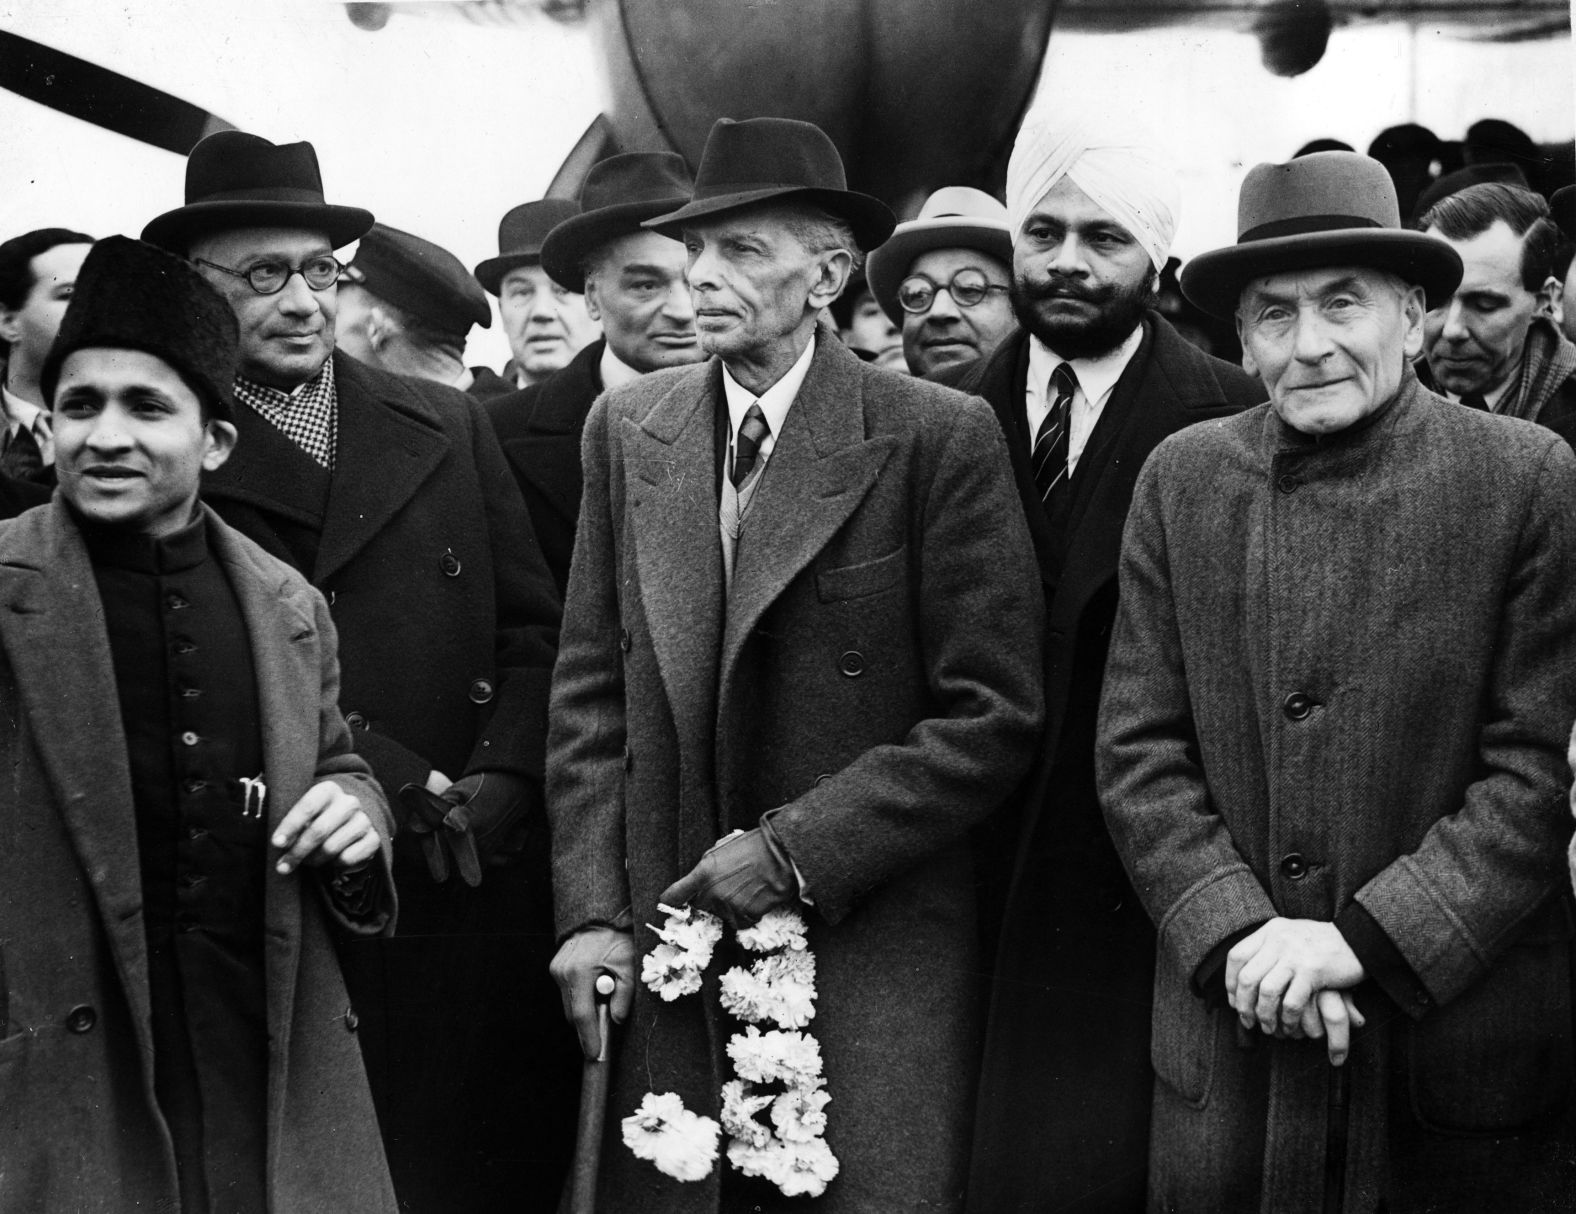 Leader of the All-India Muslim League, Muhammad Ali Jinnah (center), arrives in London on December 3, 1946, with viceroy and governor-general of India Lord Wavell,  Liaquat Ali Khan, Sardar Baldev Singh and Frederick William Pethick-Lawrence, for talks with Britain about the autonomy of Muslims in India, which culminated in the creation of the state of Pakistan.